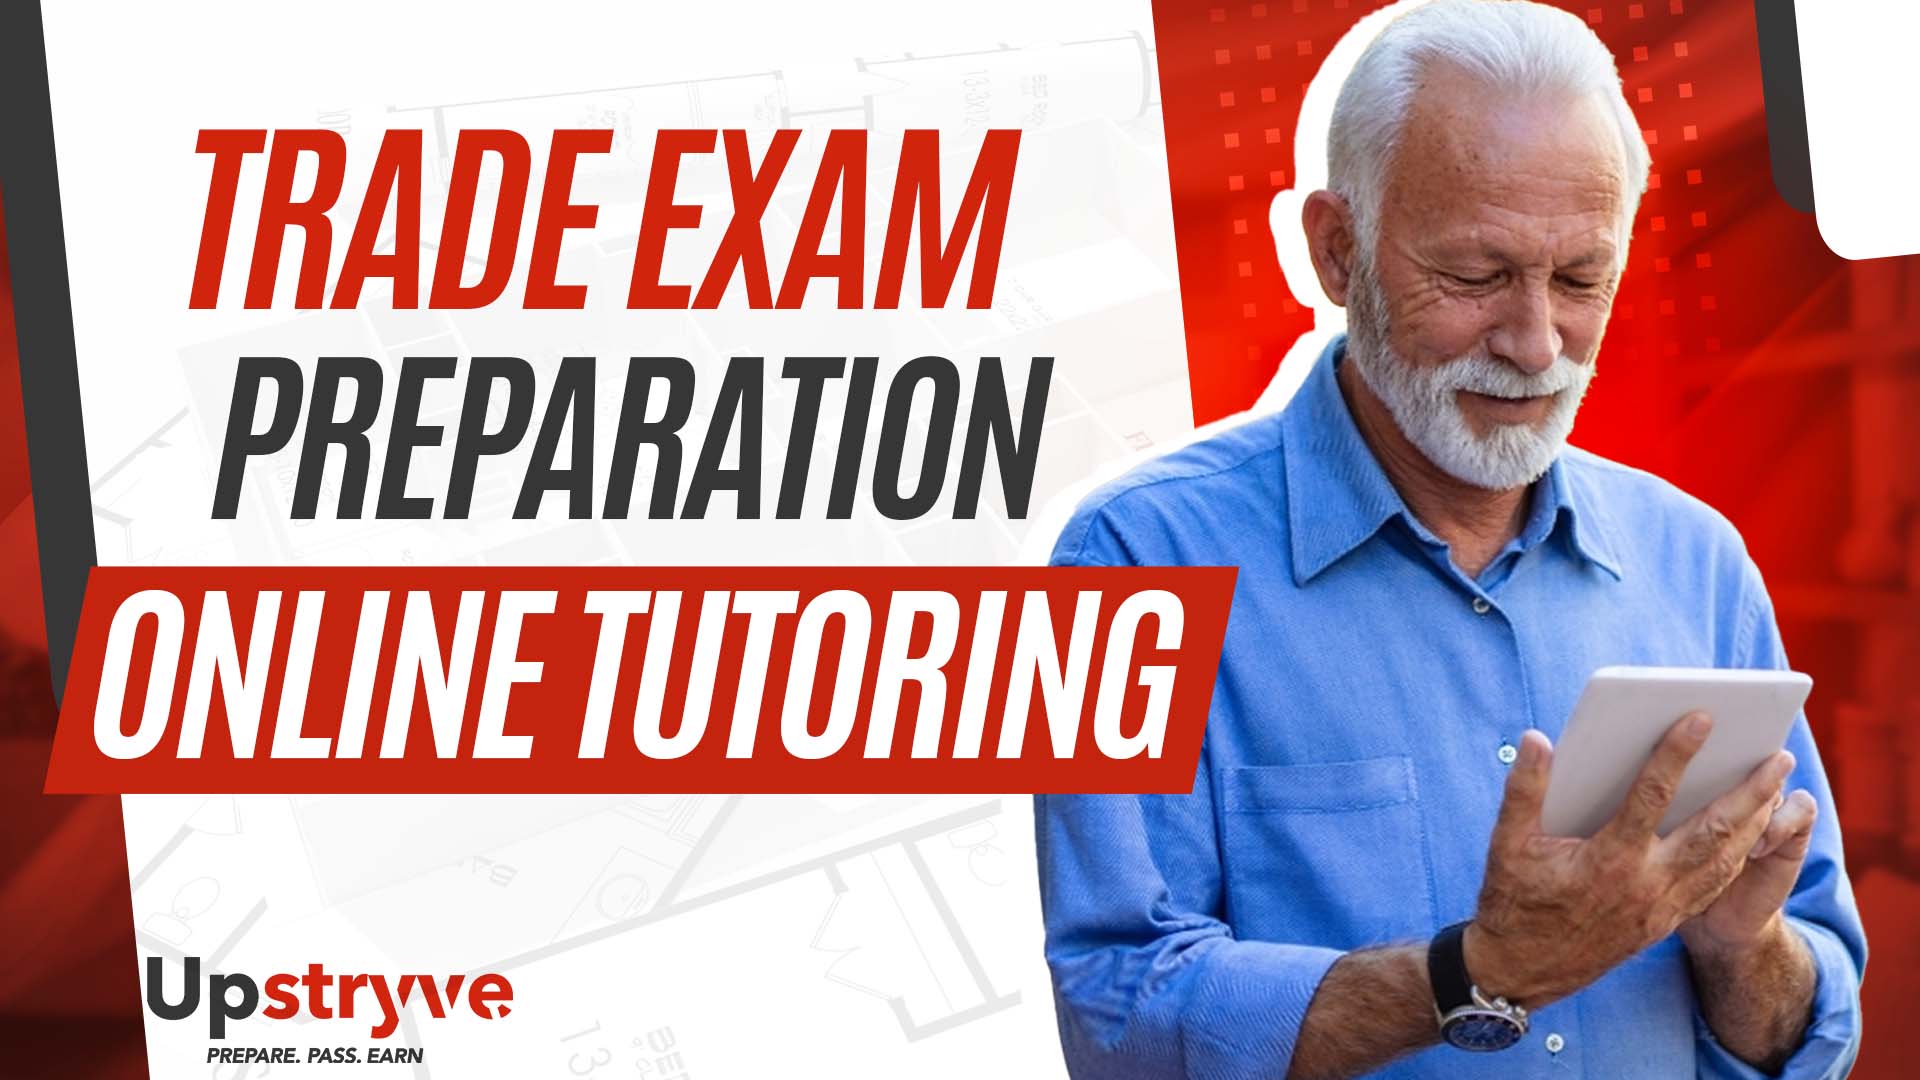 Call us today: 877-938-1888. Upstryve trade exam prep tutors offer a unique 1 on 1 learning experience for aspiring trade professionals. Our tutors have decades of experience in the field as well as tutoring to help students effectively study and pass their license exams. Our tutors have multiple opportunities to make a full time income through the Upstryve marketplace. They make an hourly wage tutoring, affiliate commissions from their book referrals and can make custom media for the company as well. 

Watch today's interview with CEO and Founder Noah Davis where he explains all the great benefits of being an Upstryve Trade Exam Tutor.